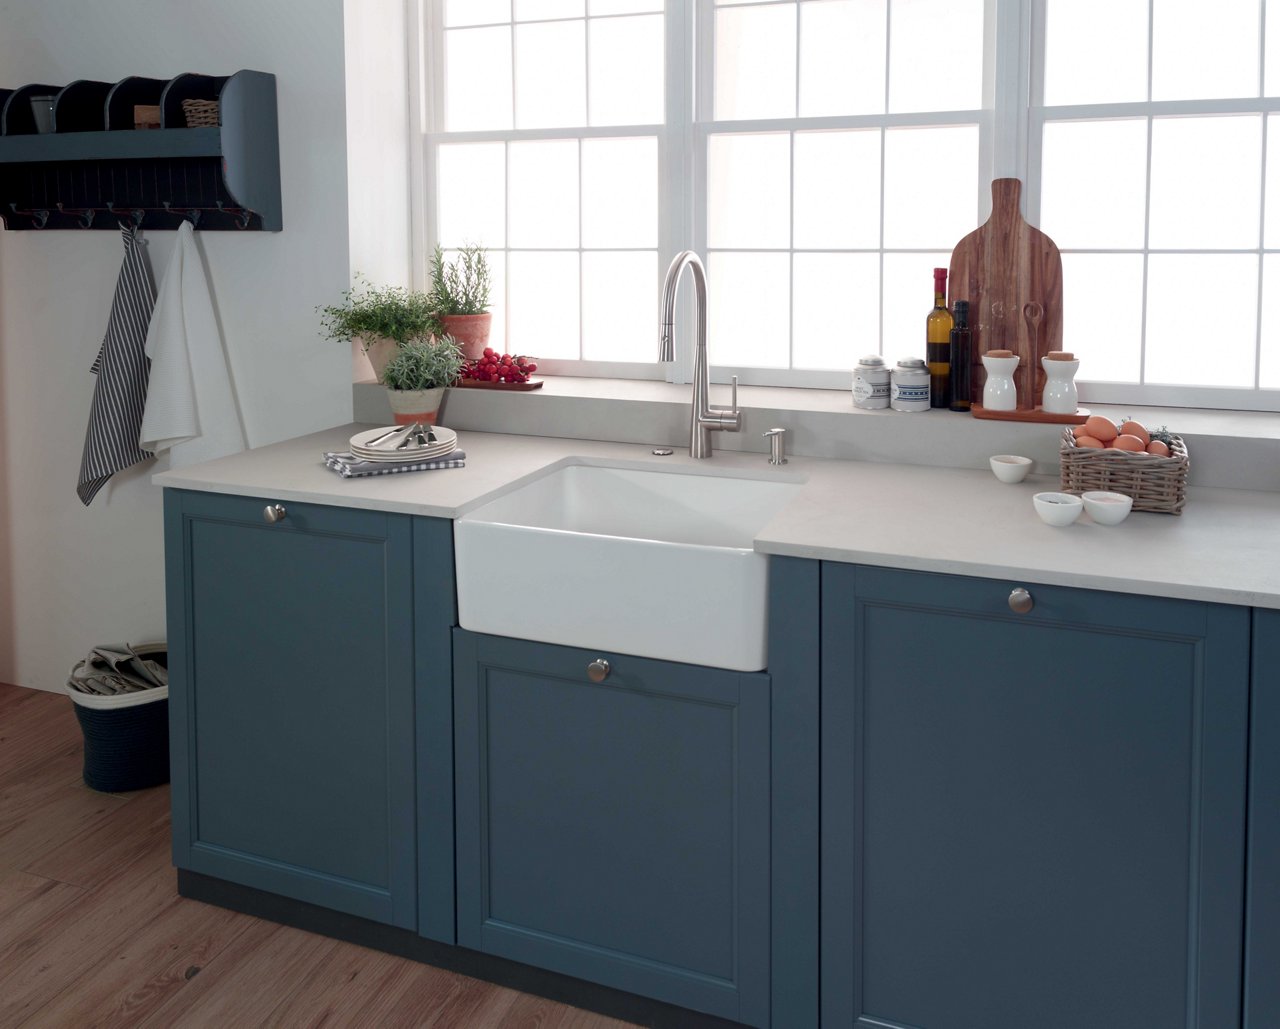 Farmhouse Fireclay Apron Front Sink